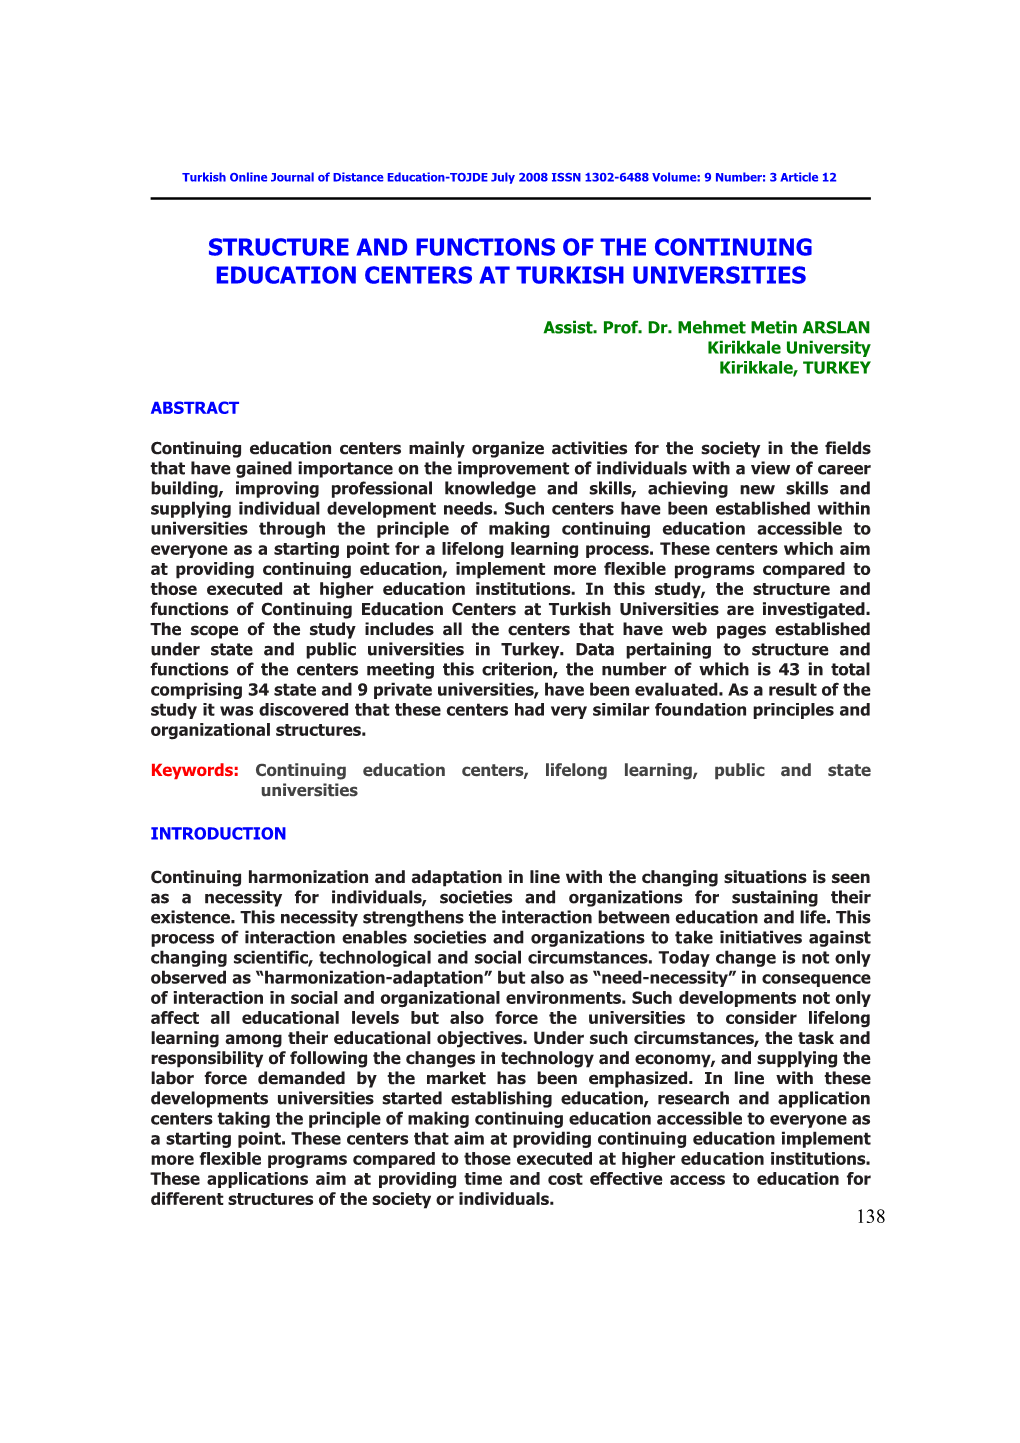 Structure and Functions of the Continuing Education Centers at Turkish Universities